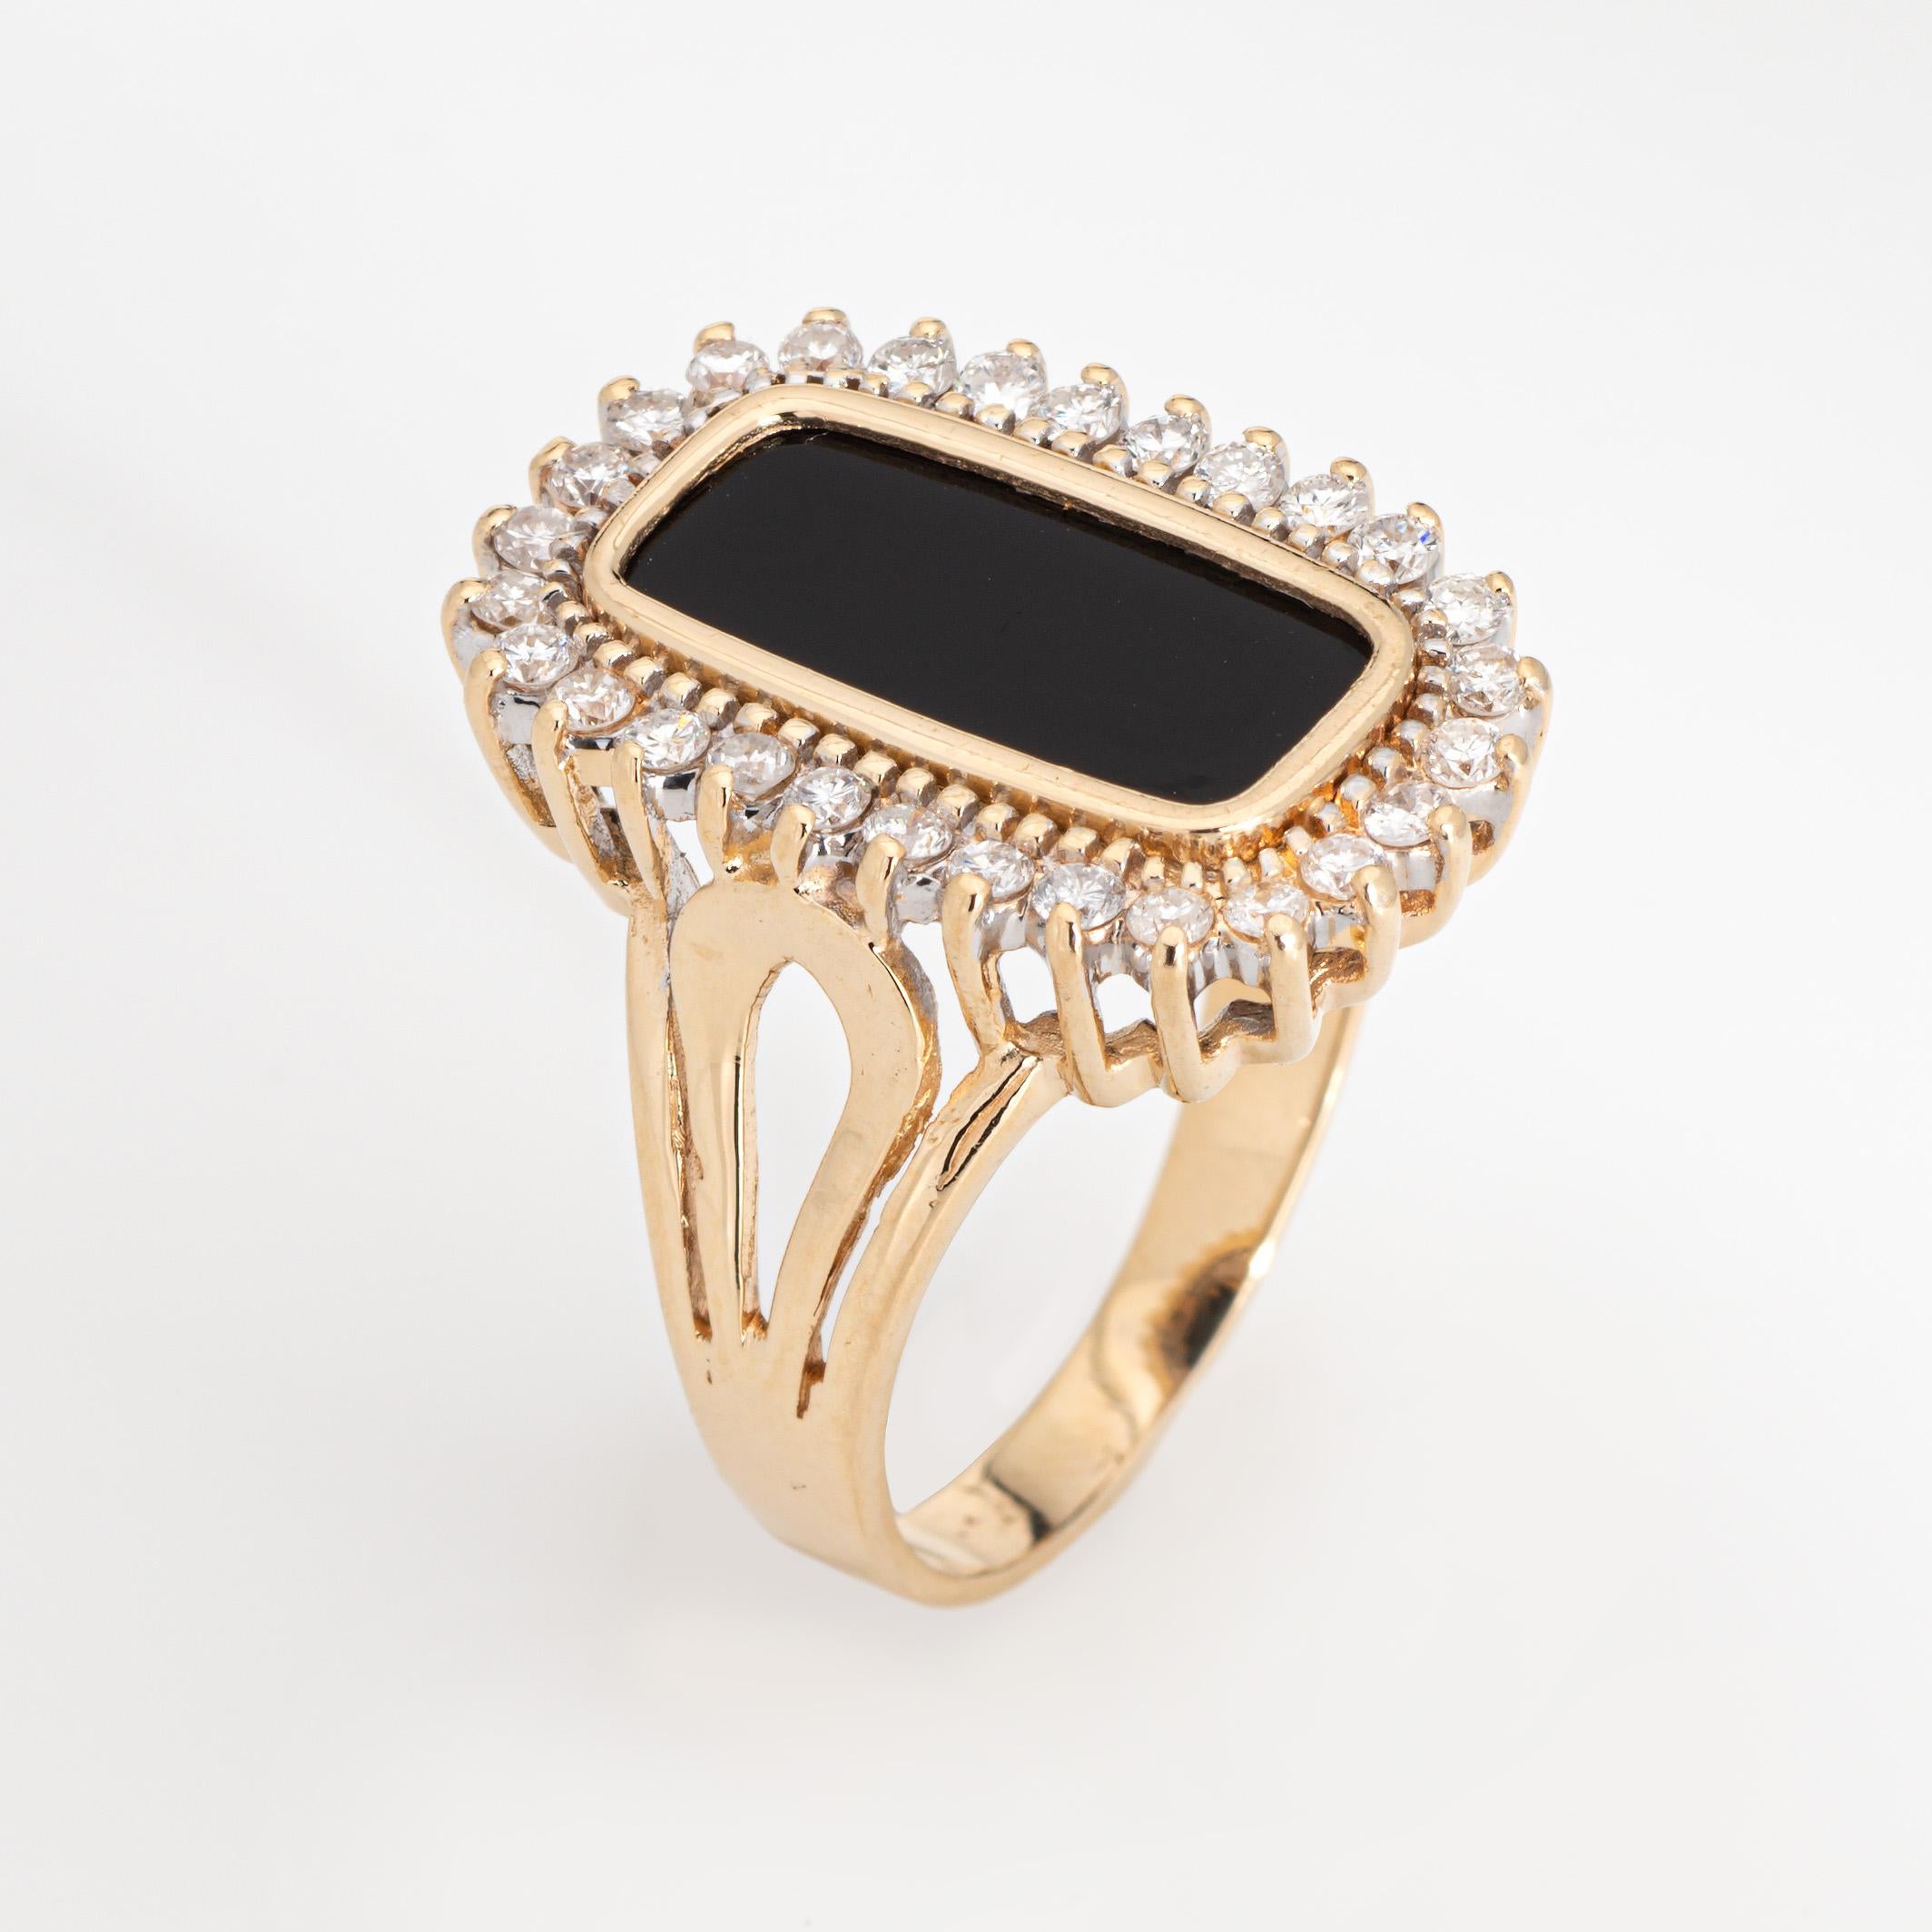 Stylish onyx & diamond ring crafted in 14 karat yellow gold (circa 1970s to 1980s). 

Diamonds total an estimated 0.30 carats (estimated at H-I color and SI1-I1 clarity). Onyx measures 14mm x 6mm. The onyx is in very good condition and free of